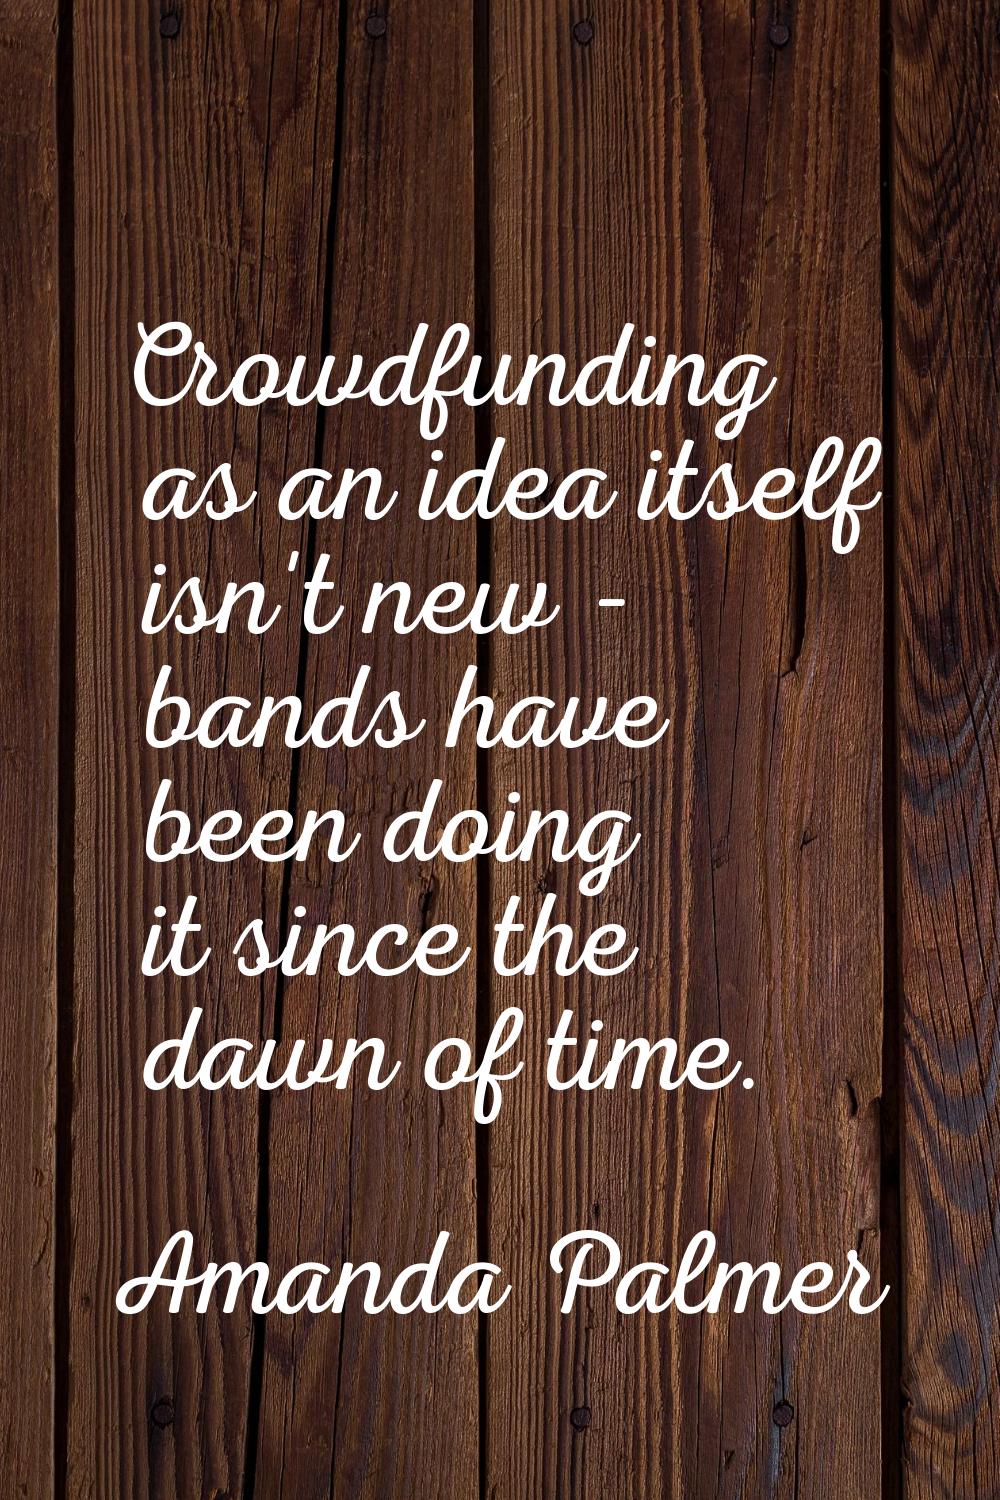 Crowdfunding as an idea itself isn't new - bands have been doing it since the dawn of time.